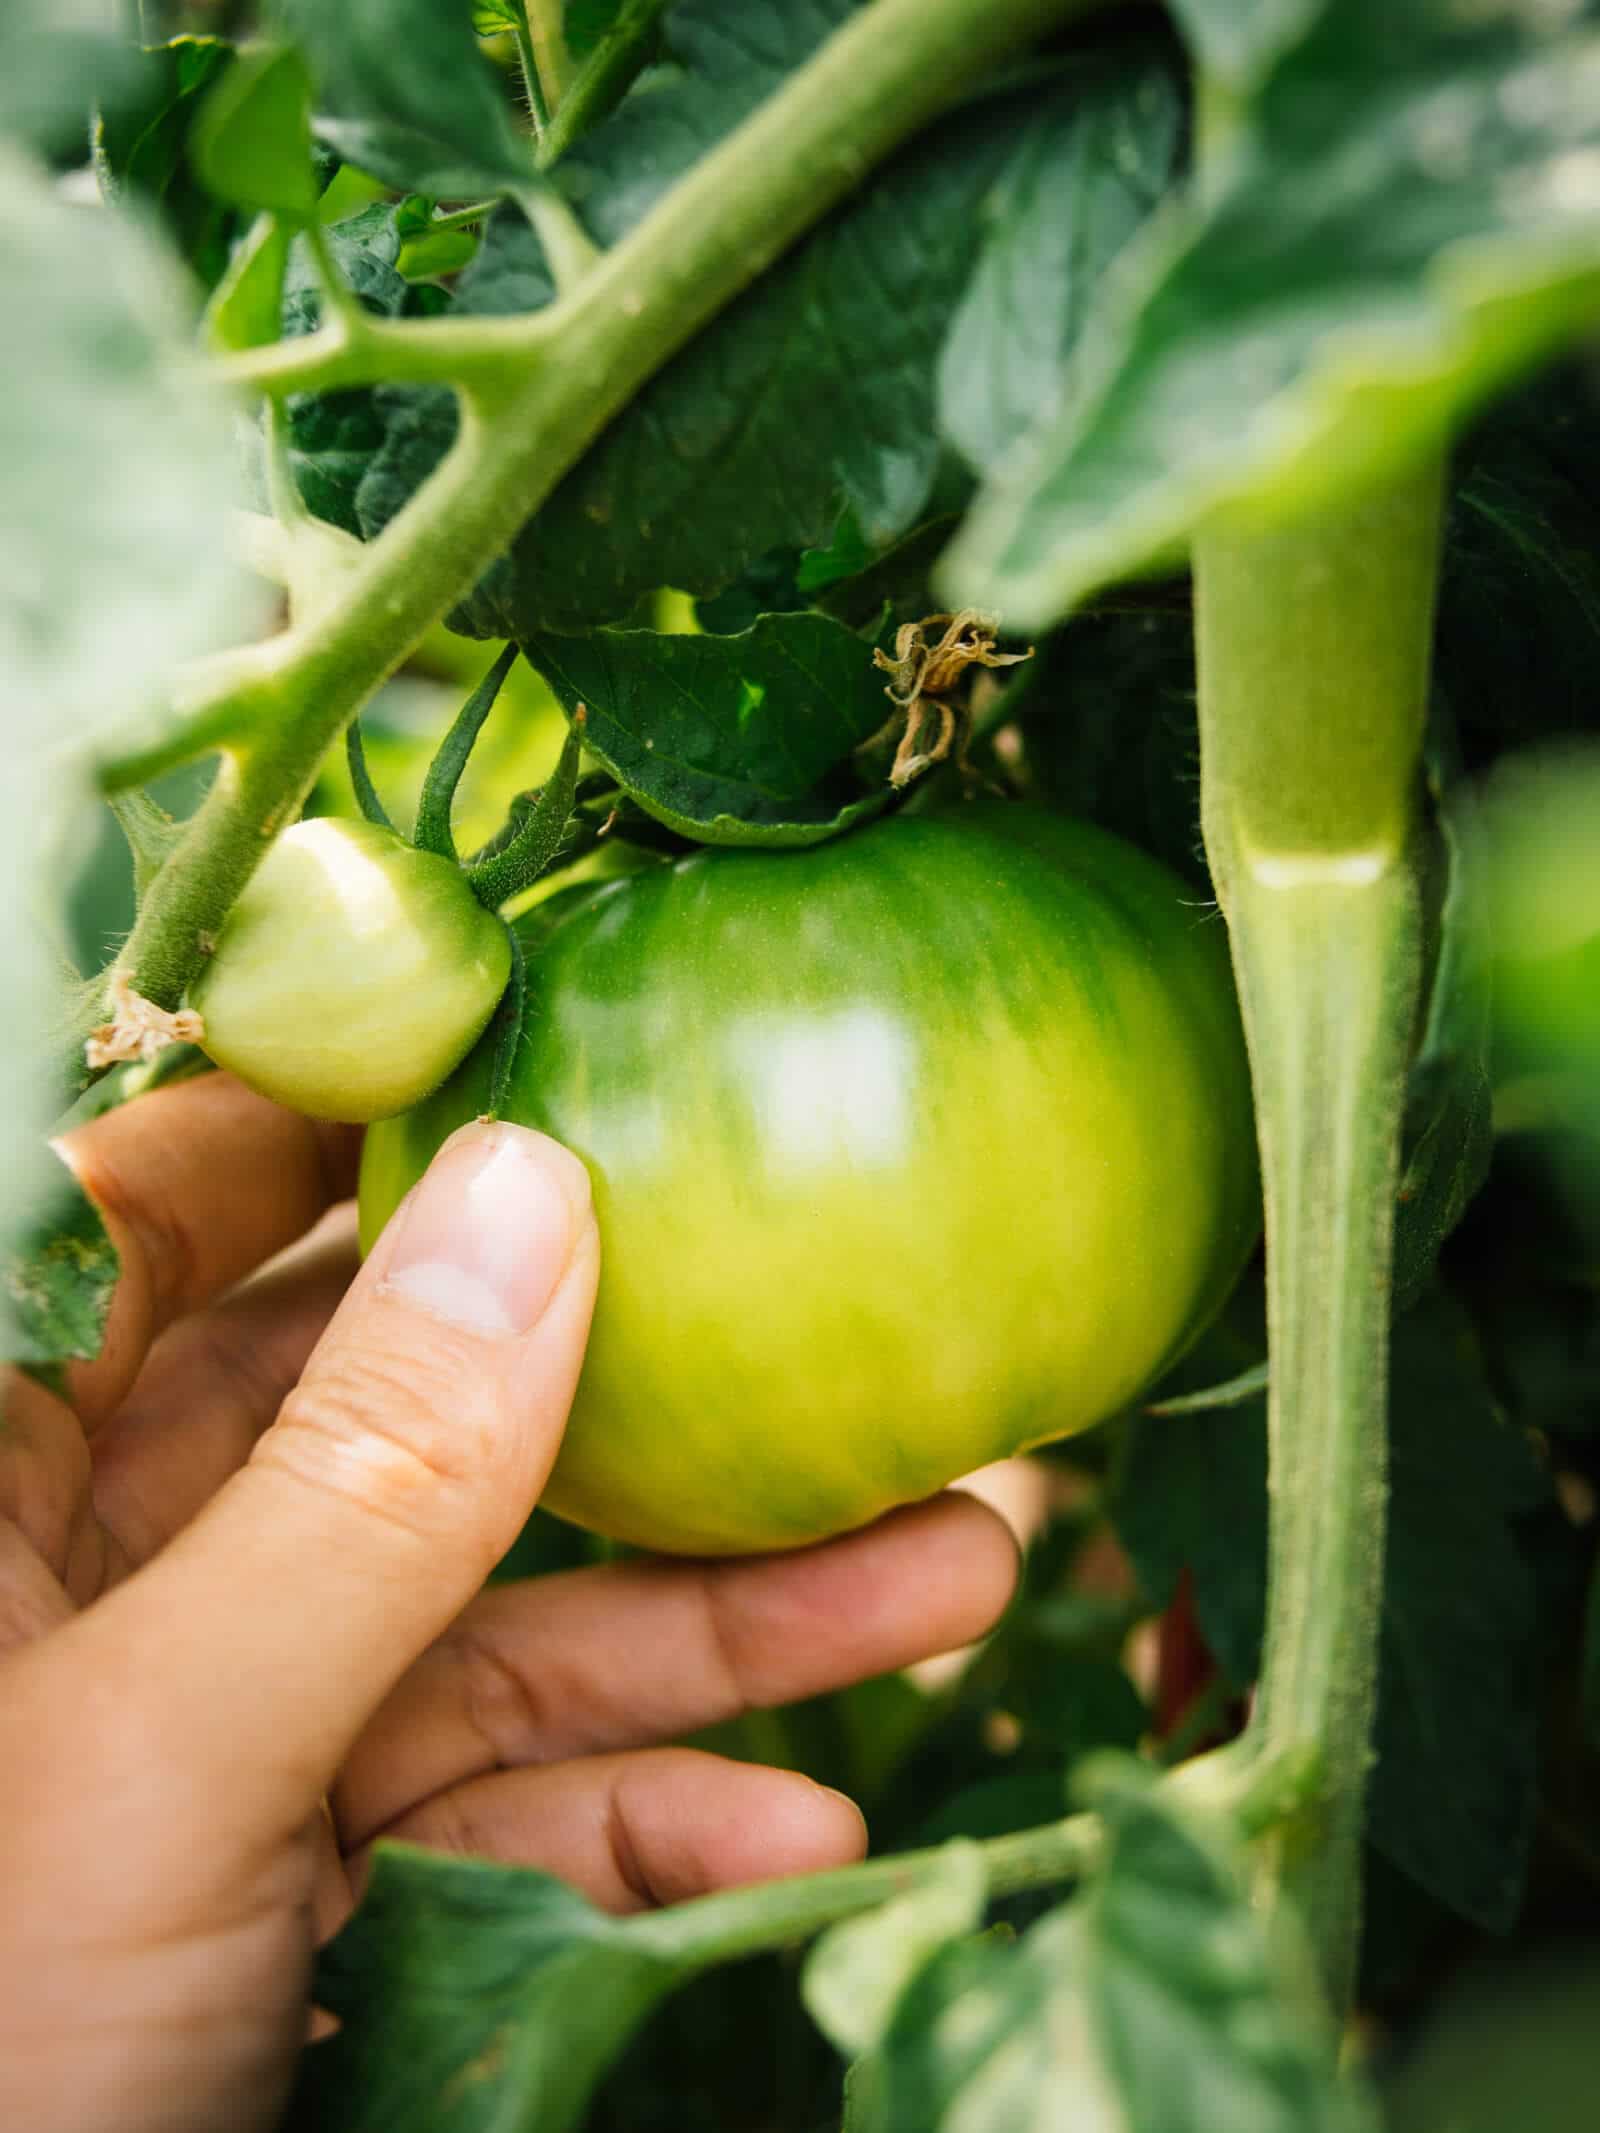 Learn how to prevent blossom end rot and grow healthy tomatoes